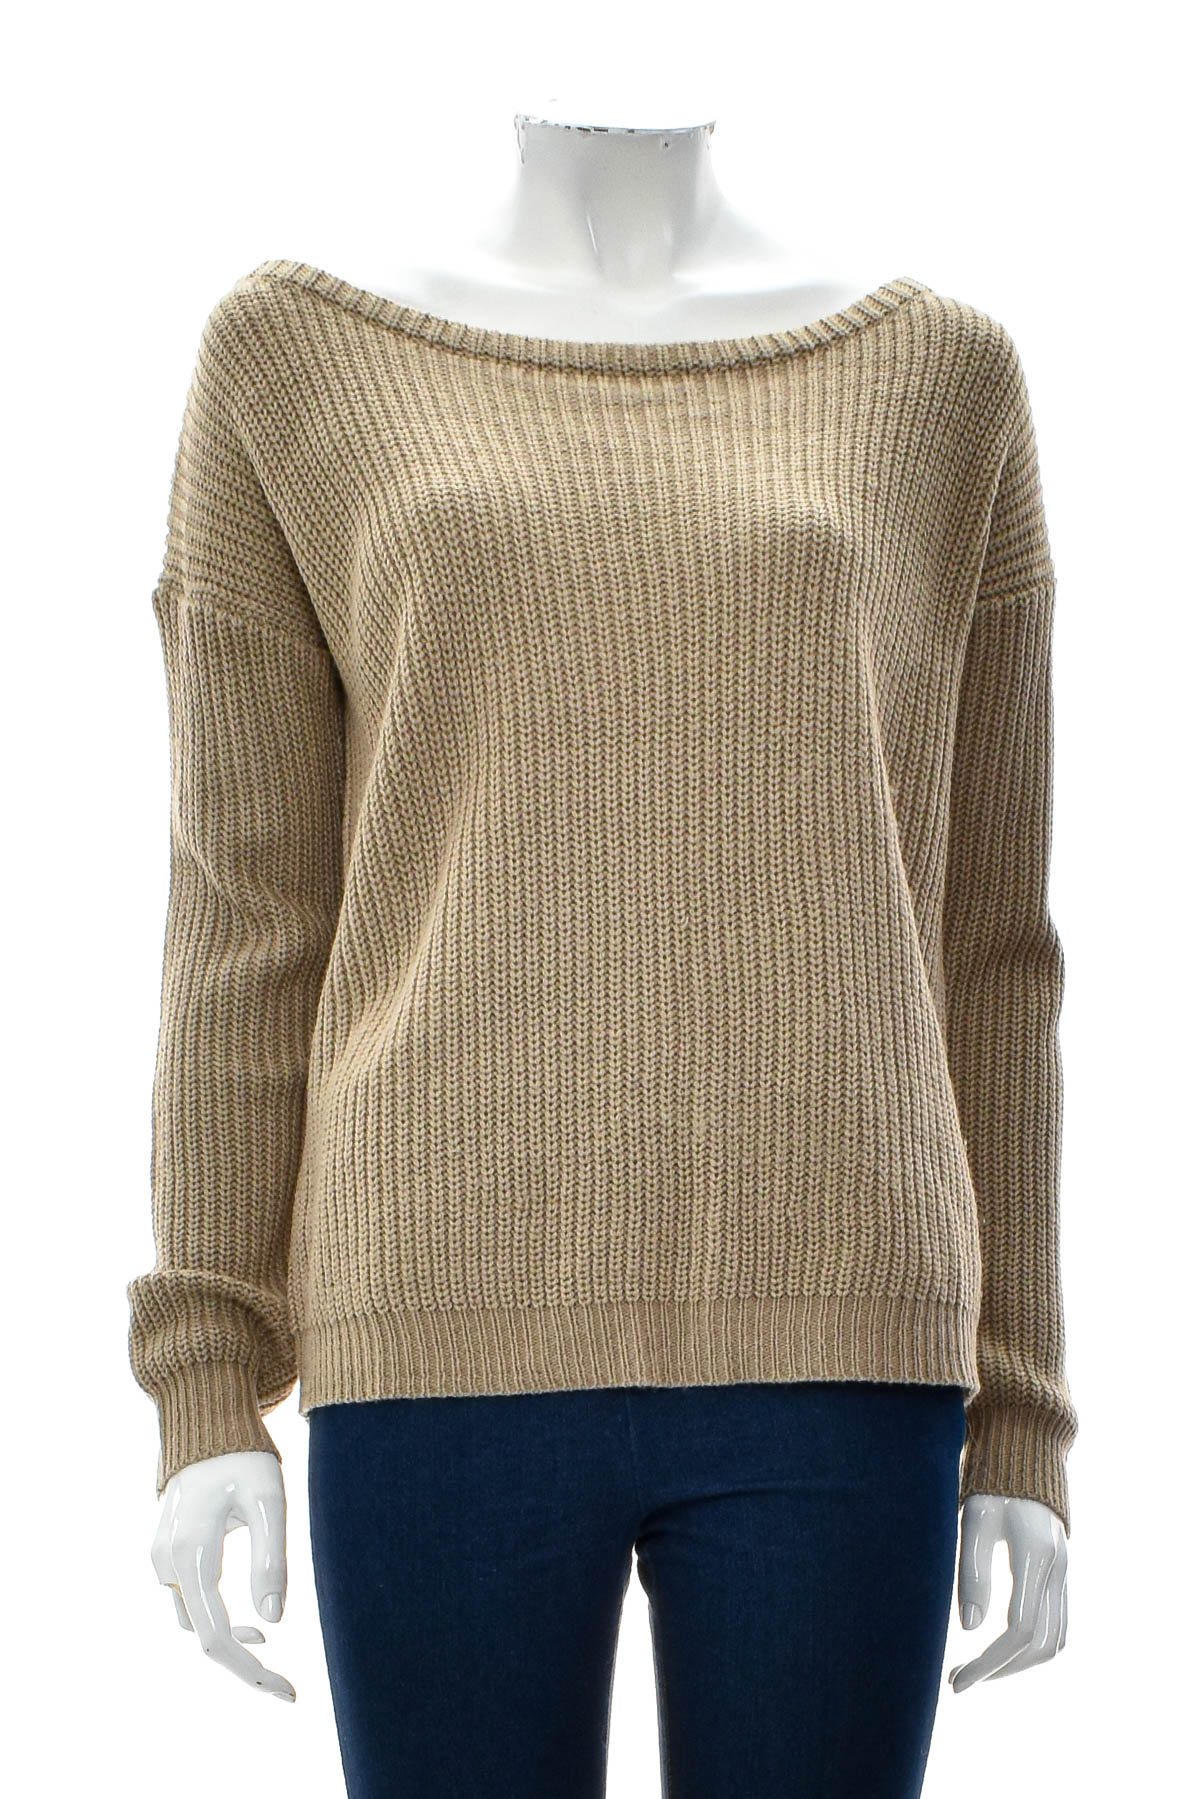 Women's sweater - MISSGUIDED - 0